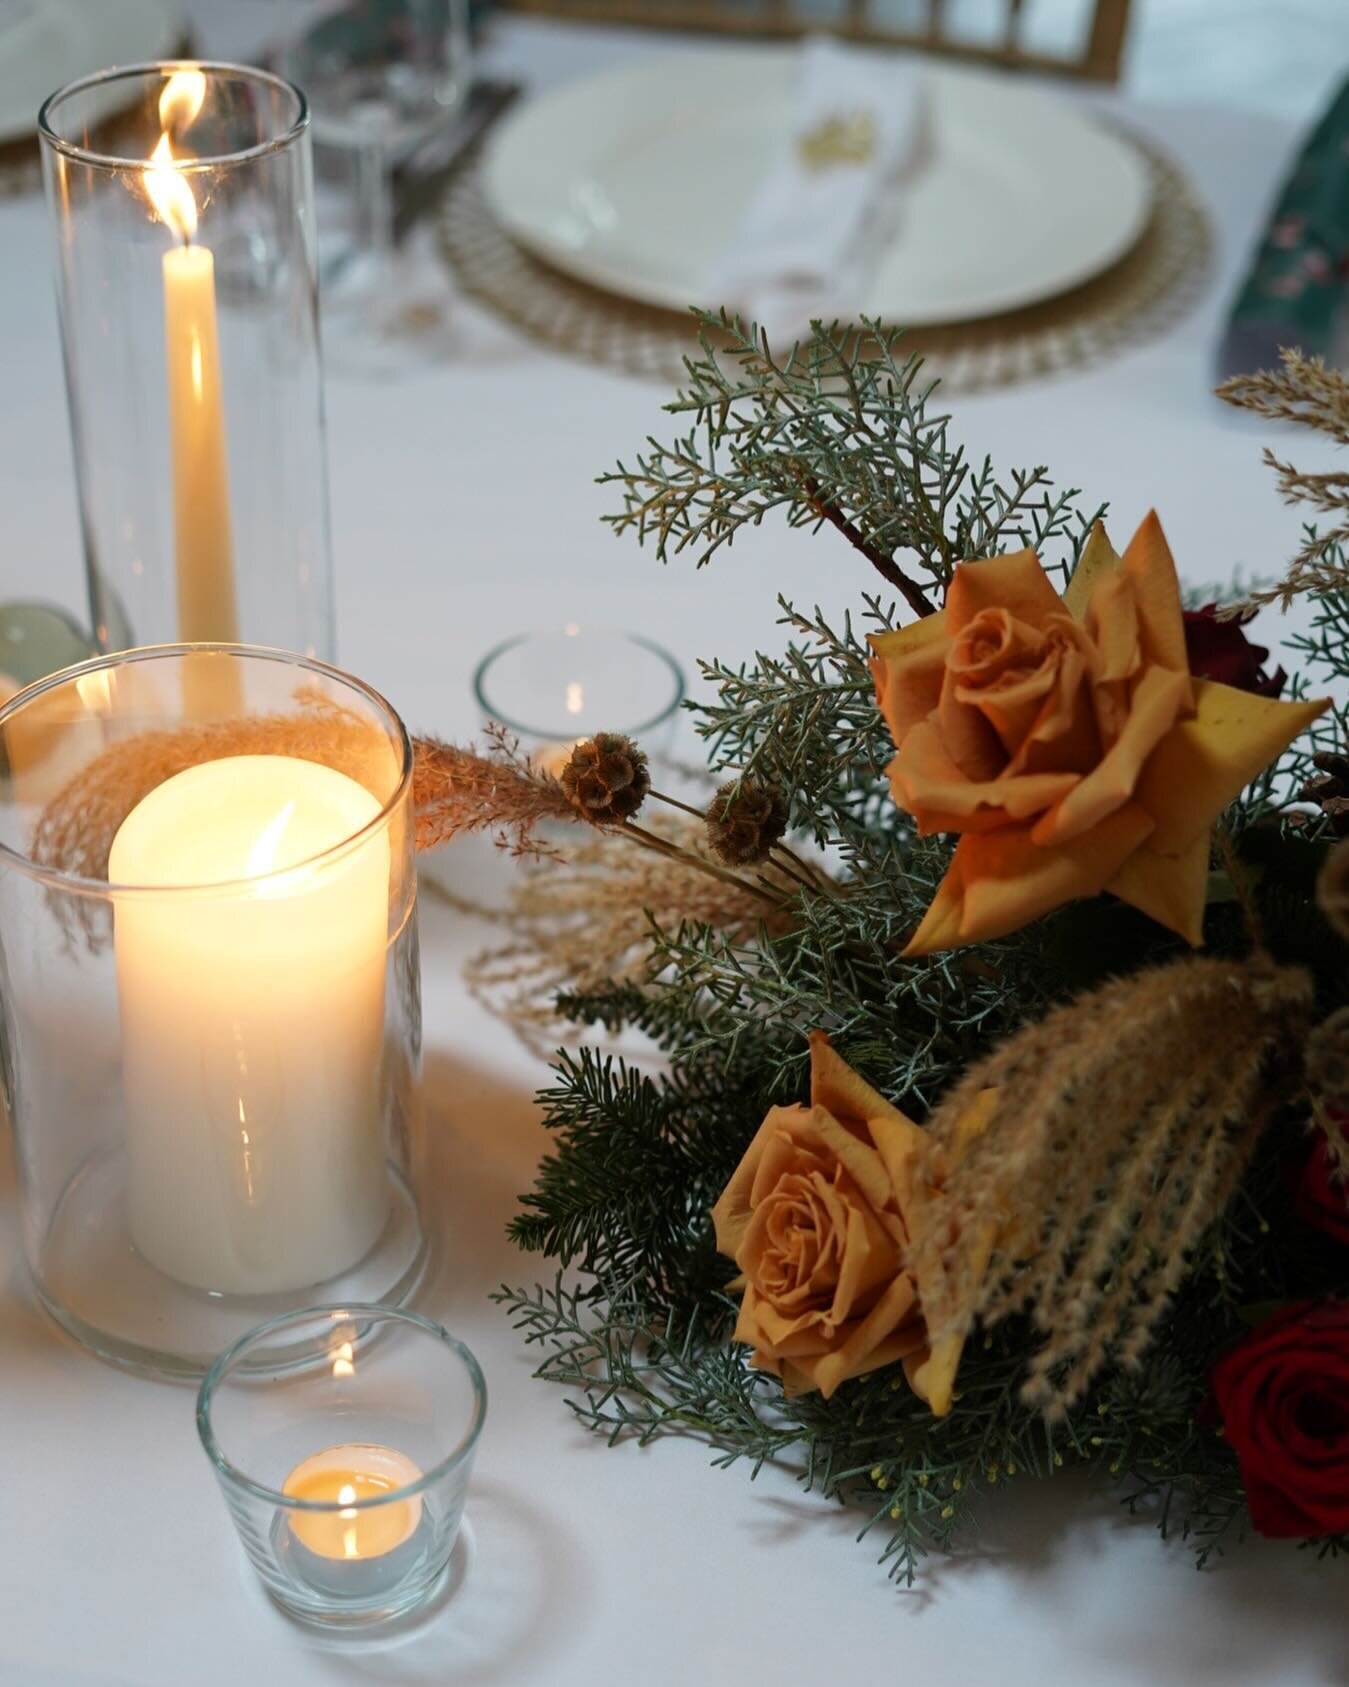 On the table this Christmas&hellip;. 🎄My brother and sister-in law made a massive effort in the Christmas decorations this year the flowers for the table just added to the festive cheer.
.
.
.
.
. 
#christmasdecor #christmasflowers #christmasdecorat